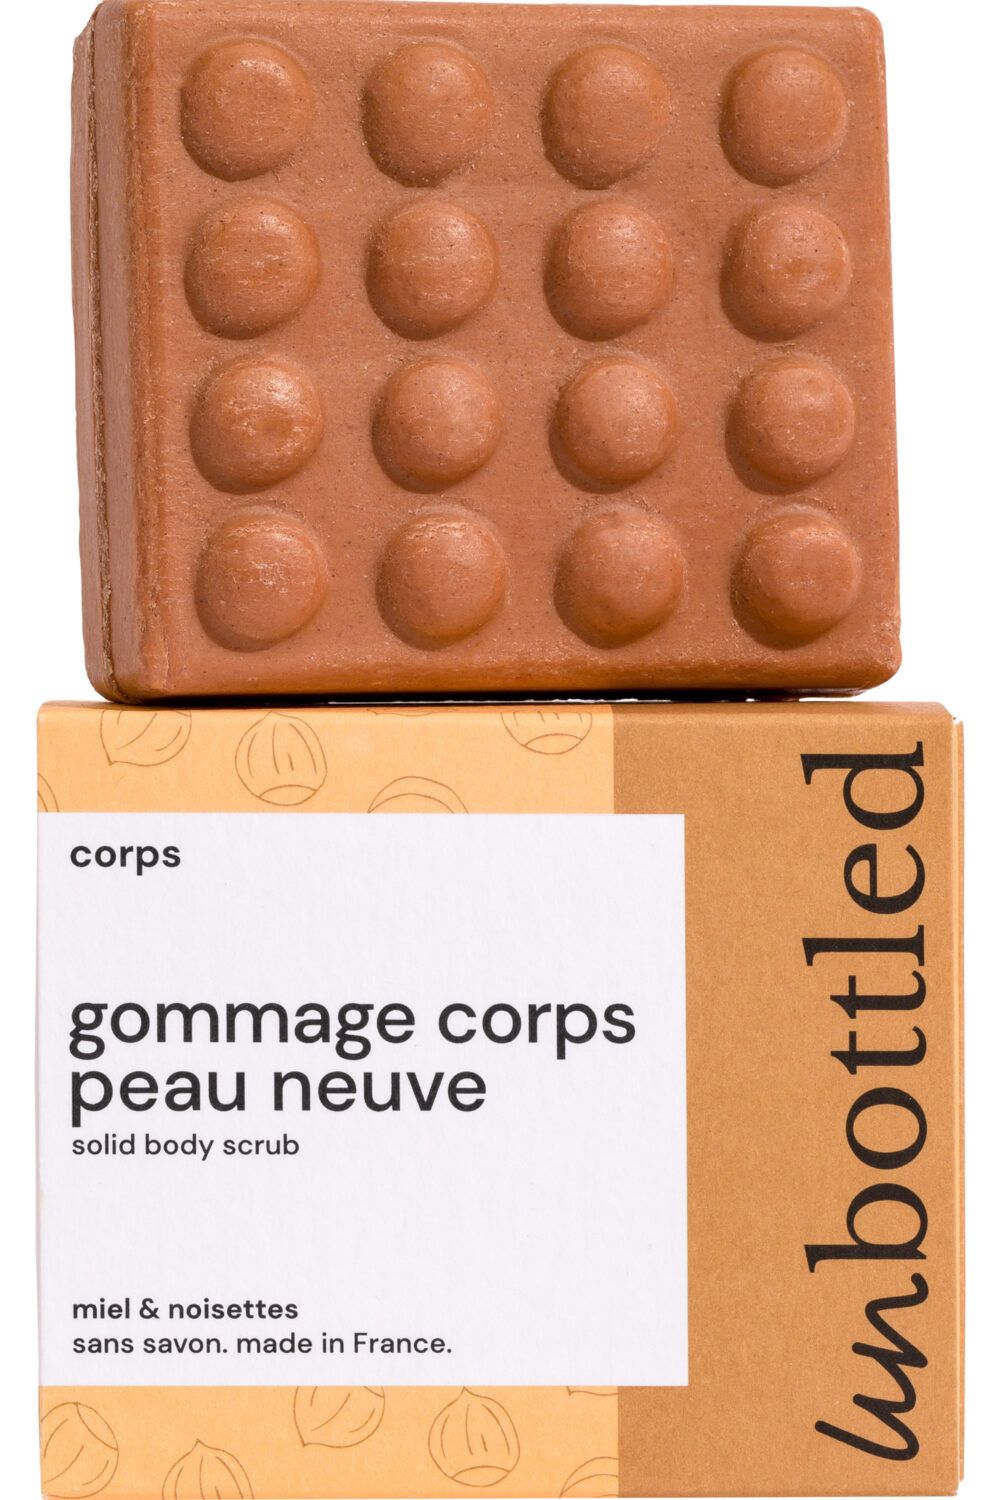 Unbottled - Gommage corps solide peau neuve